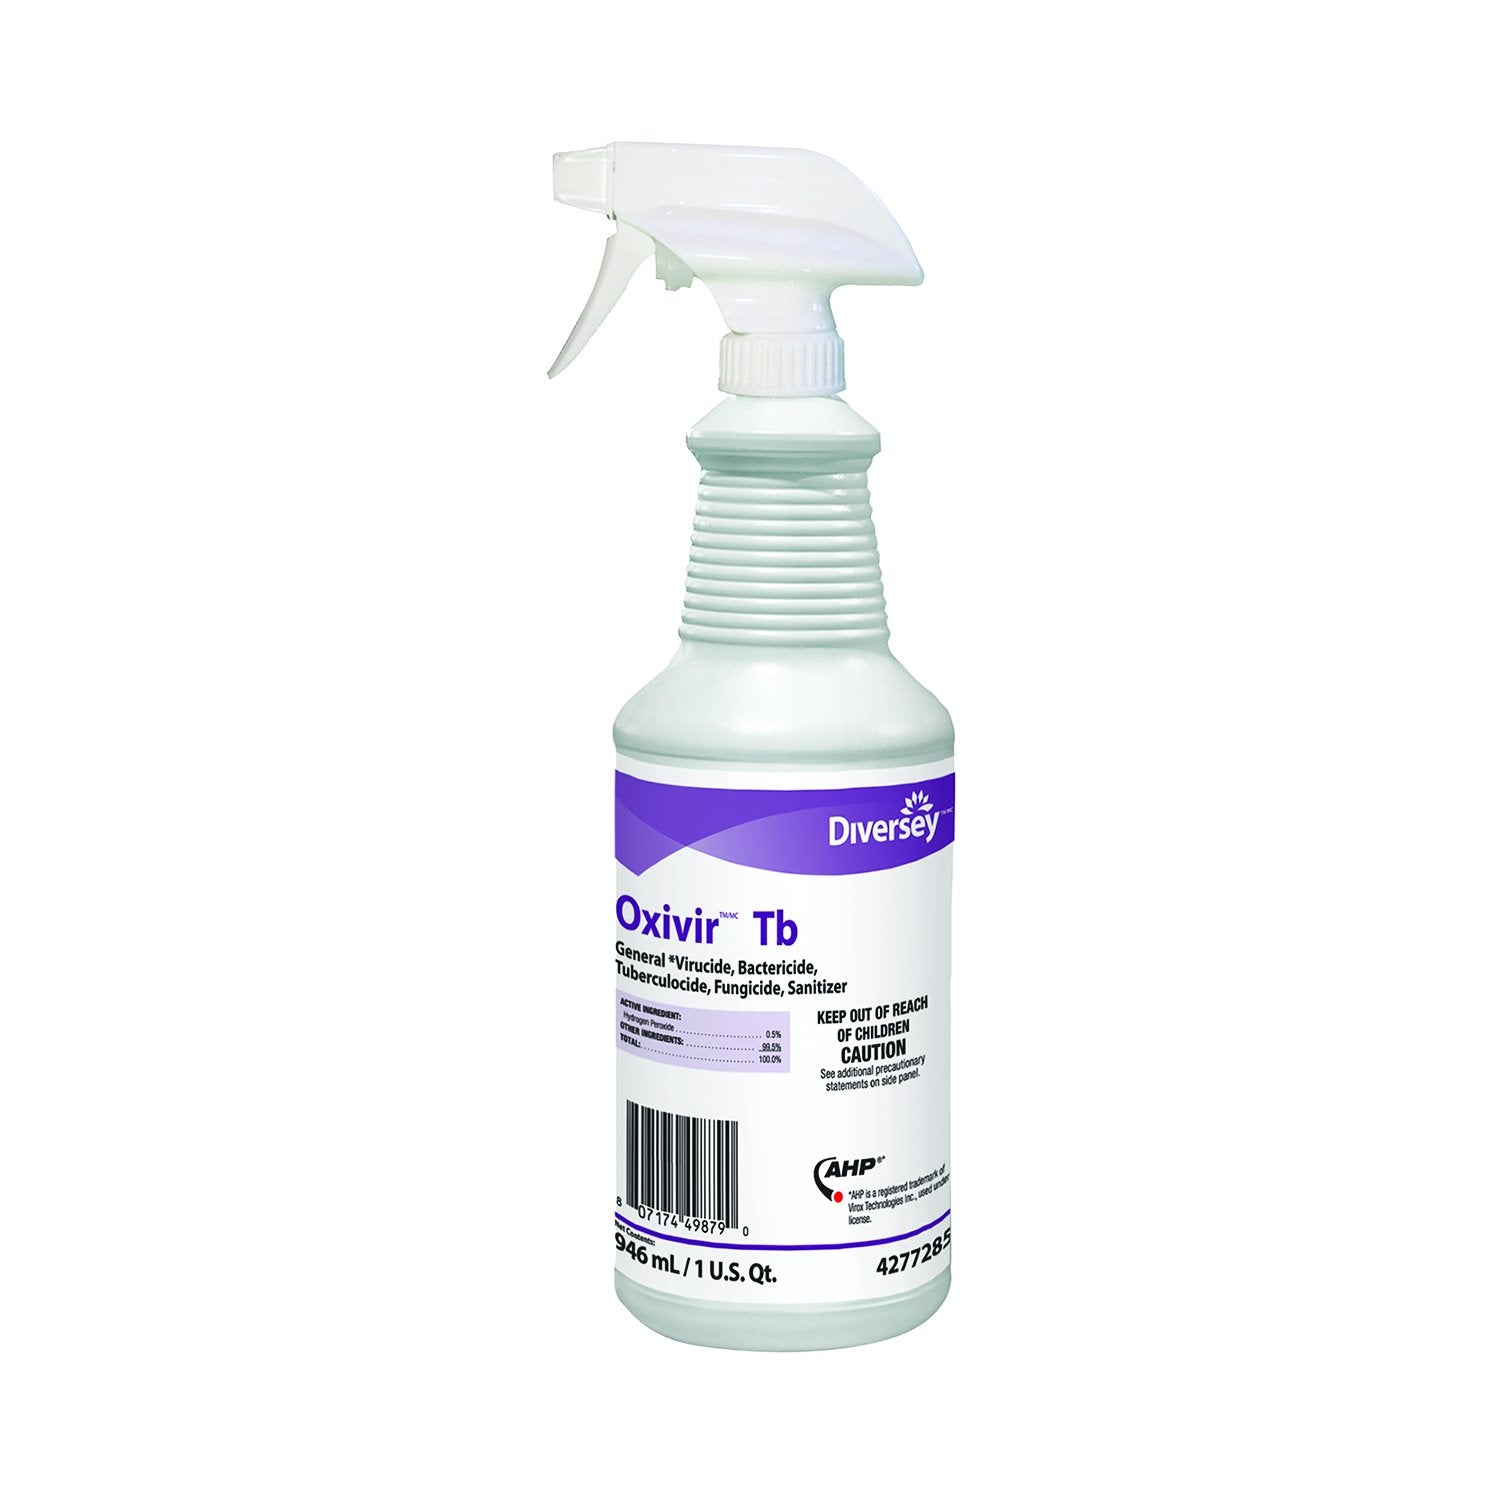 Oxivir TB Disinfectant Spray | 946 ml Spray Bottle - Case of 12 Janitorial Supplies - Cleanflow